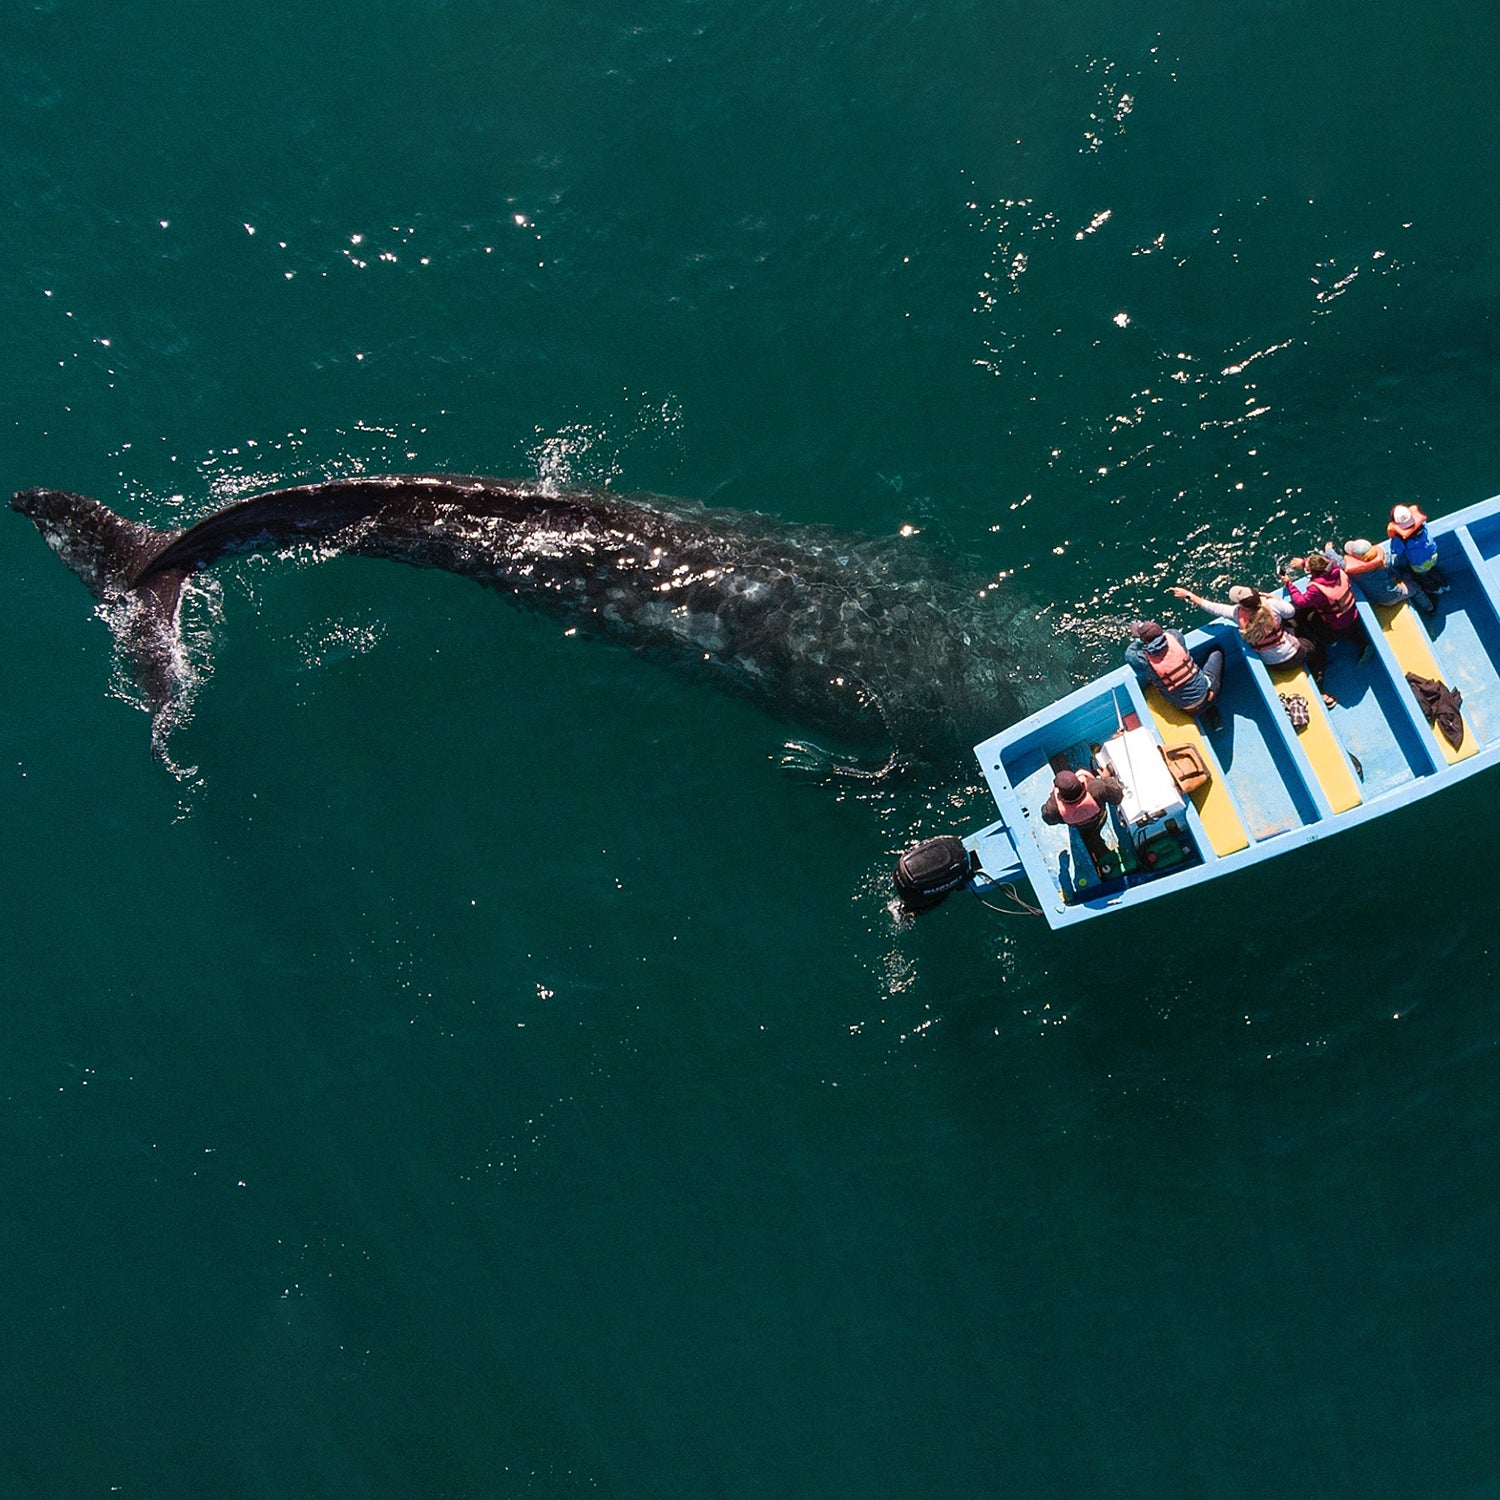 A gray whale swims beneath a boat with seven people. The whales swim thousands of miles to mate in the warmer waters off the Baja peninsula.